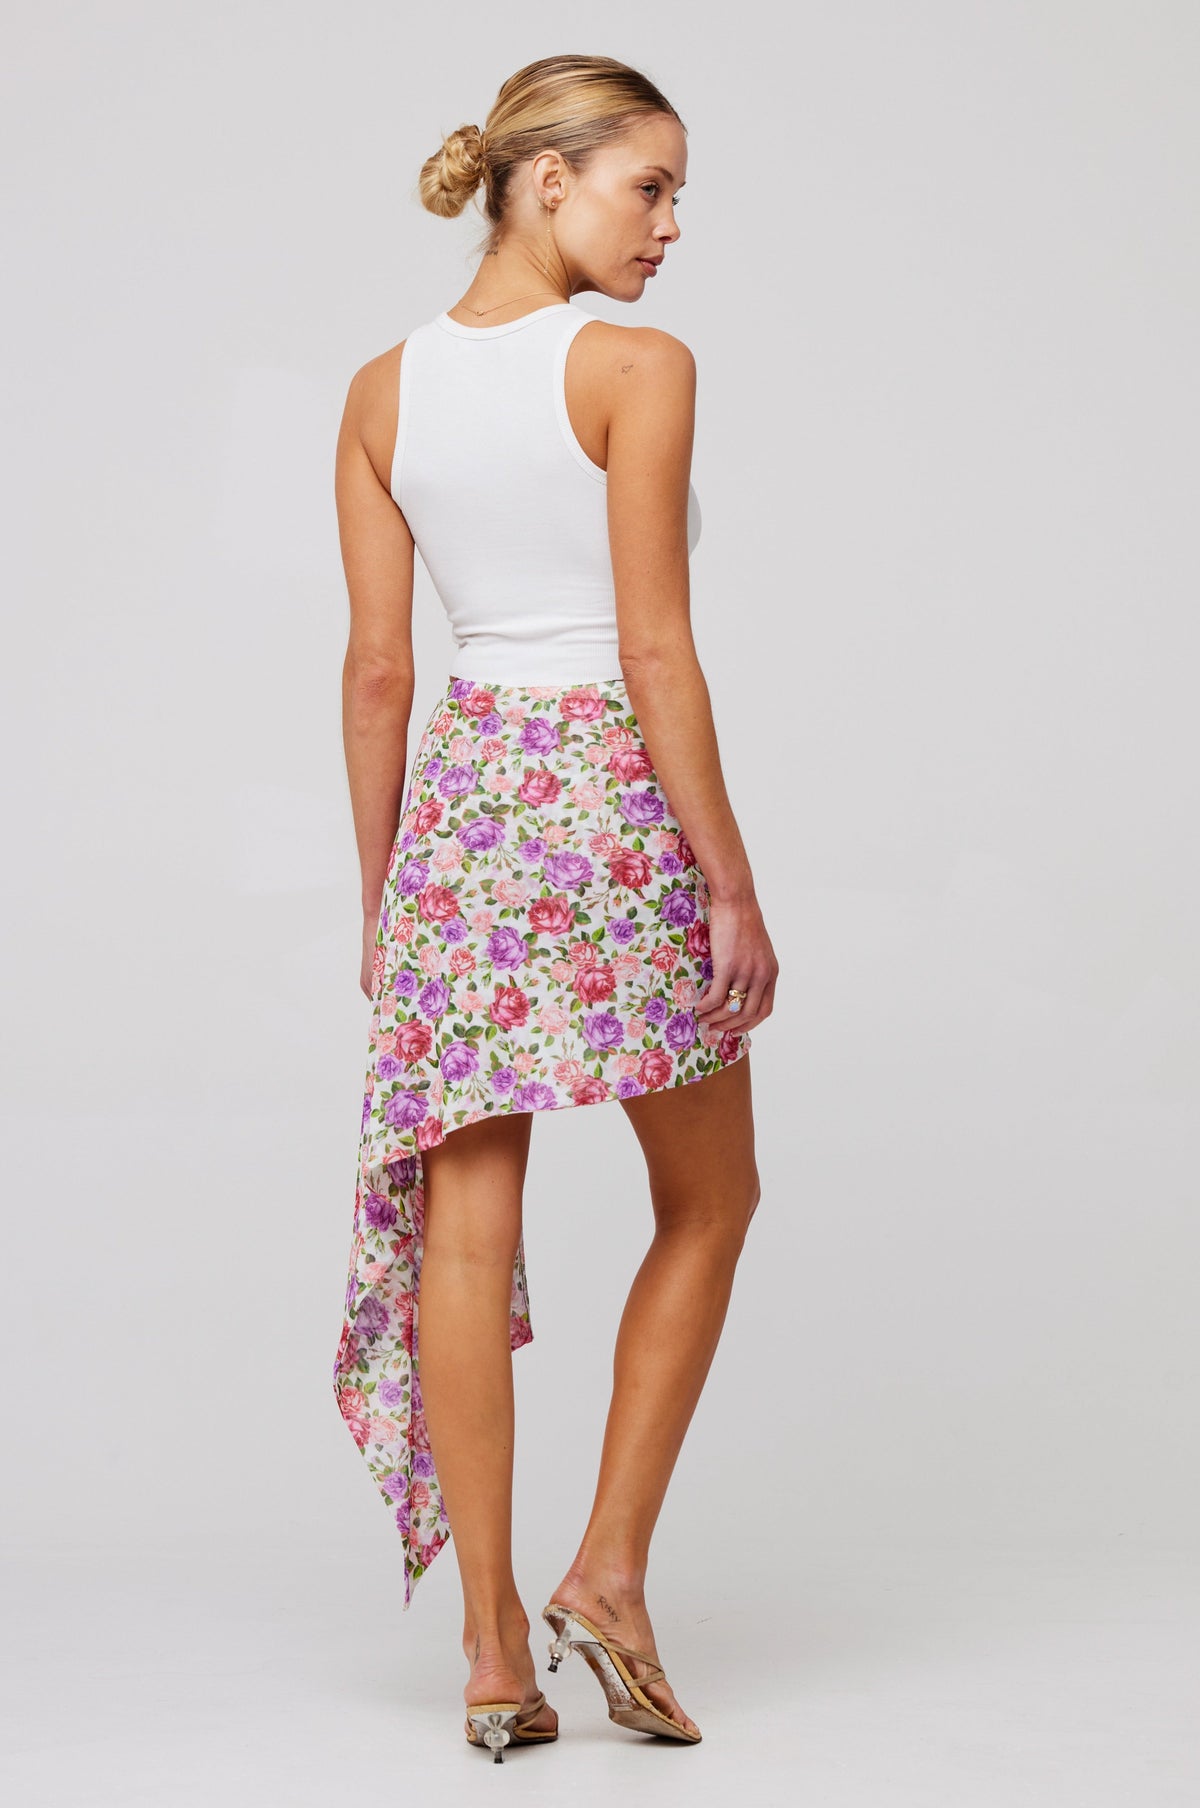 This is an image of Mila Skirt in Vintage Floral - RESA featuring a model wearing the dress